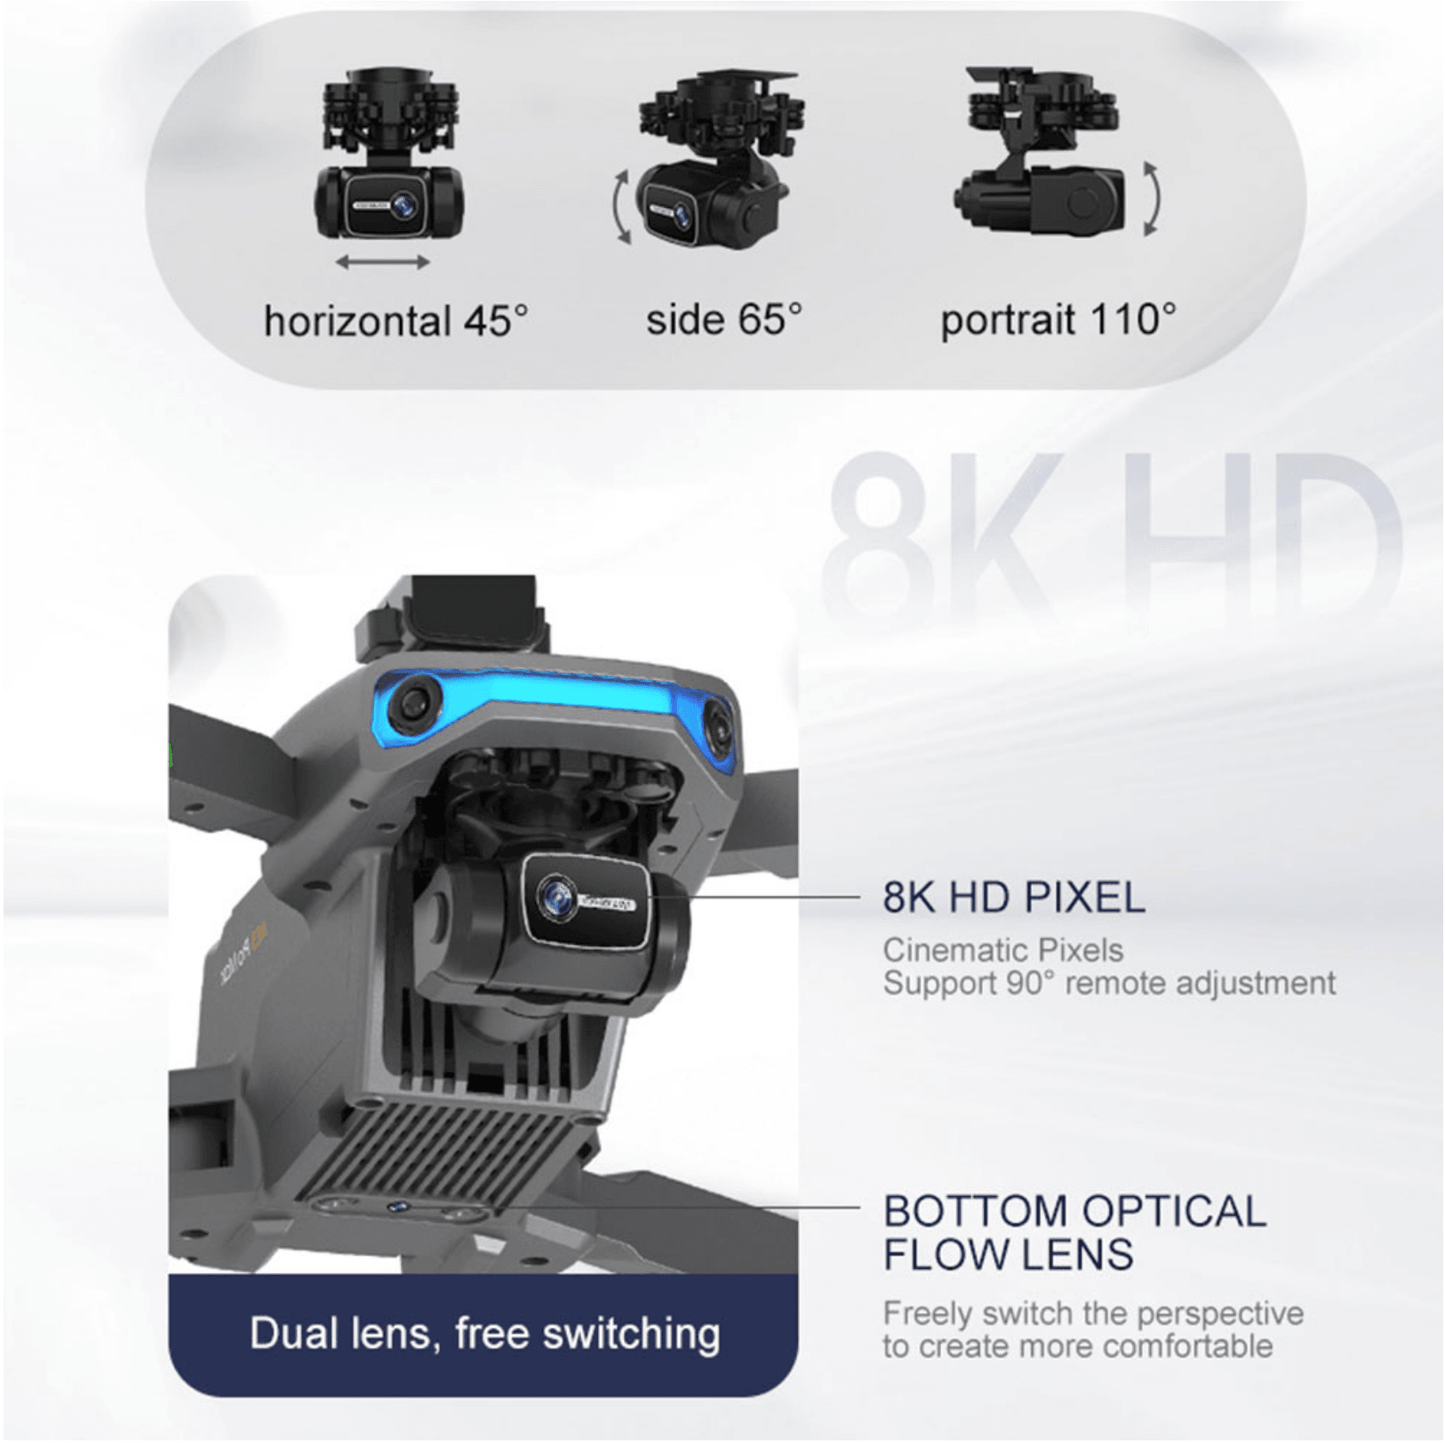 PROFESSIONAL DRONE CAMERA 8K 5G 3 AXIS ANTI SHAKE GIMBAL 360° OBSTACLE AVOIDANCE TECHNOLOGY - APS Drone Tech